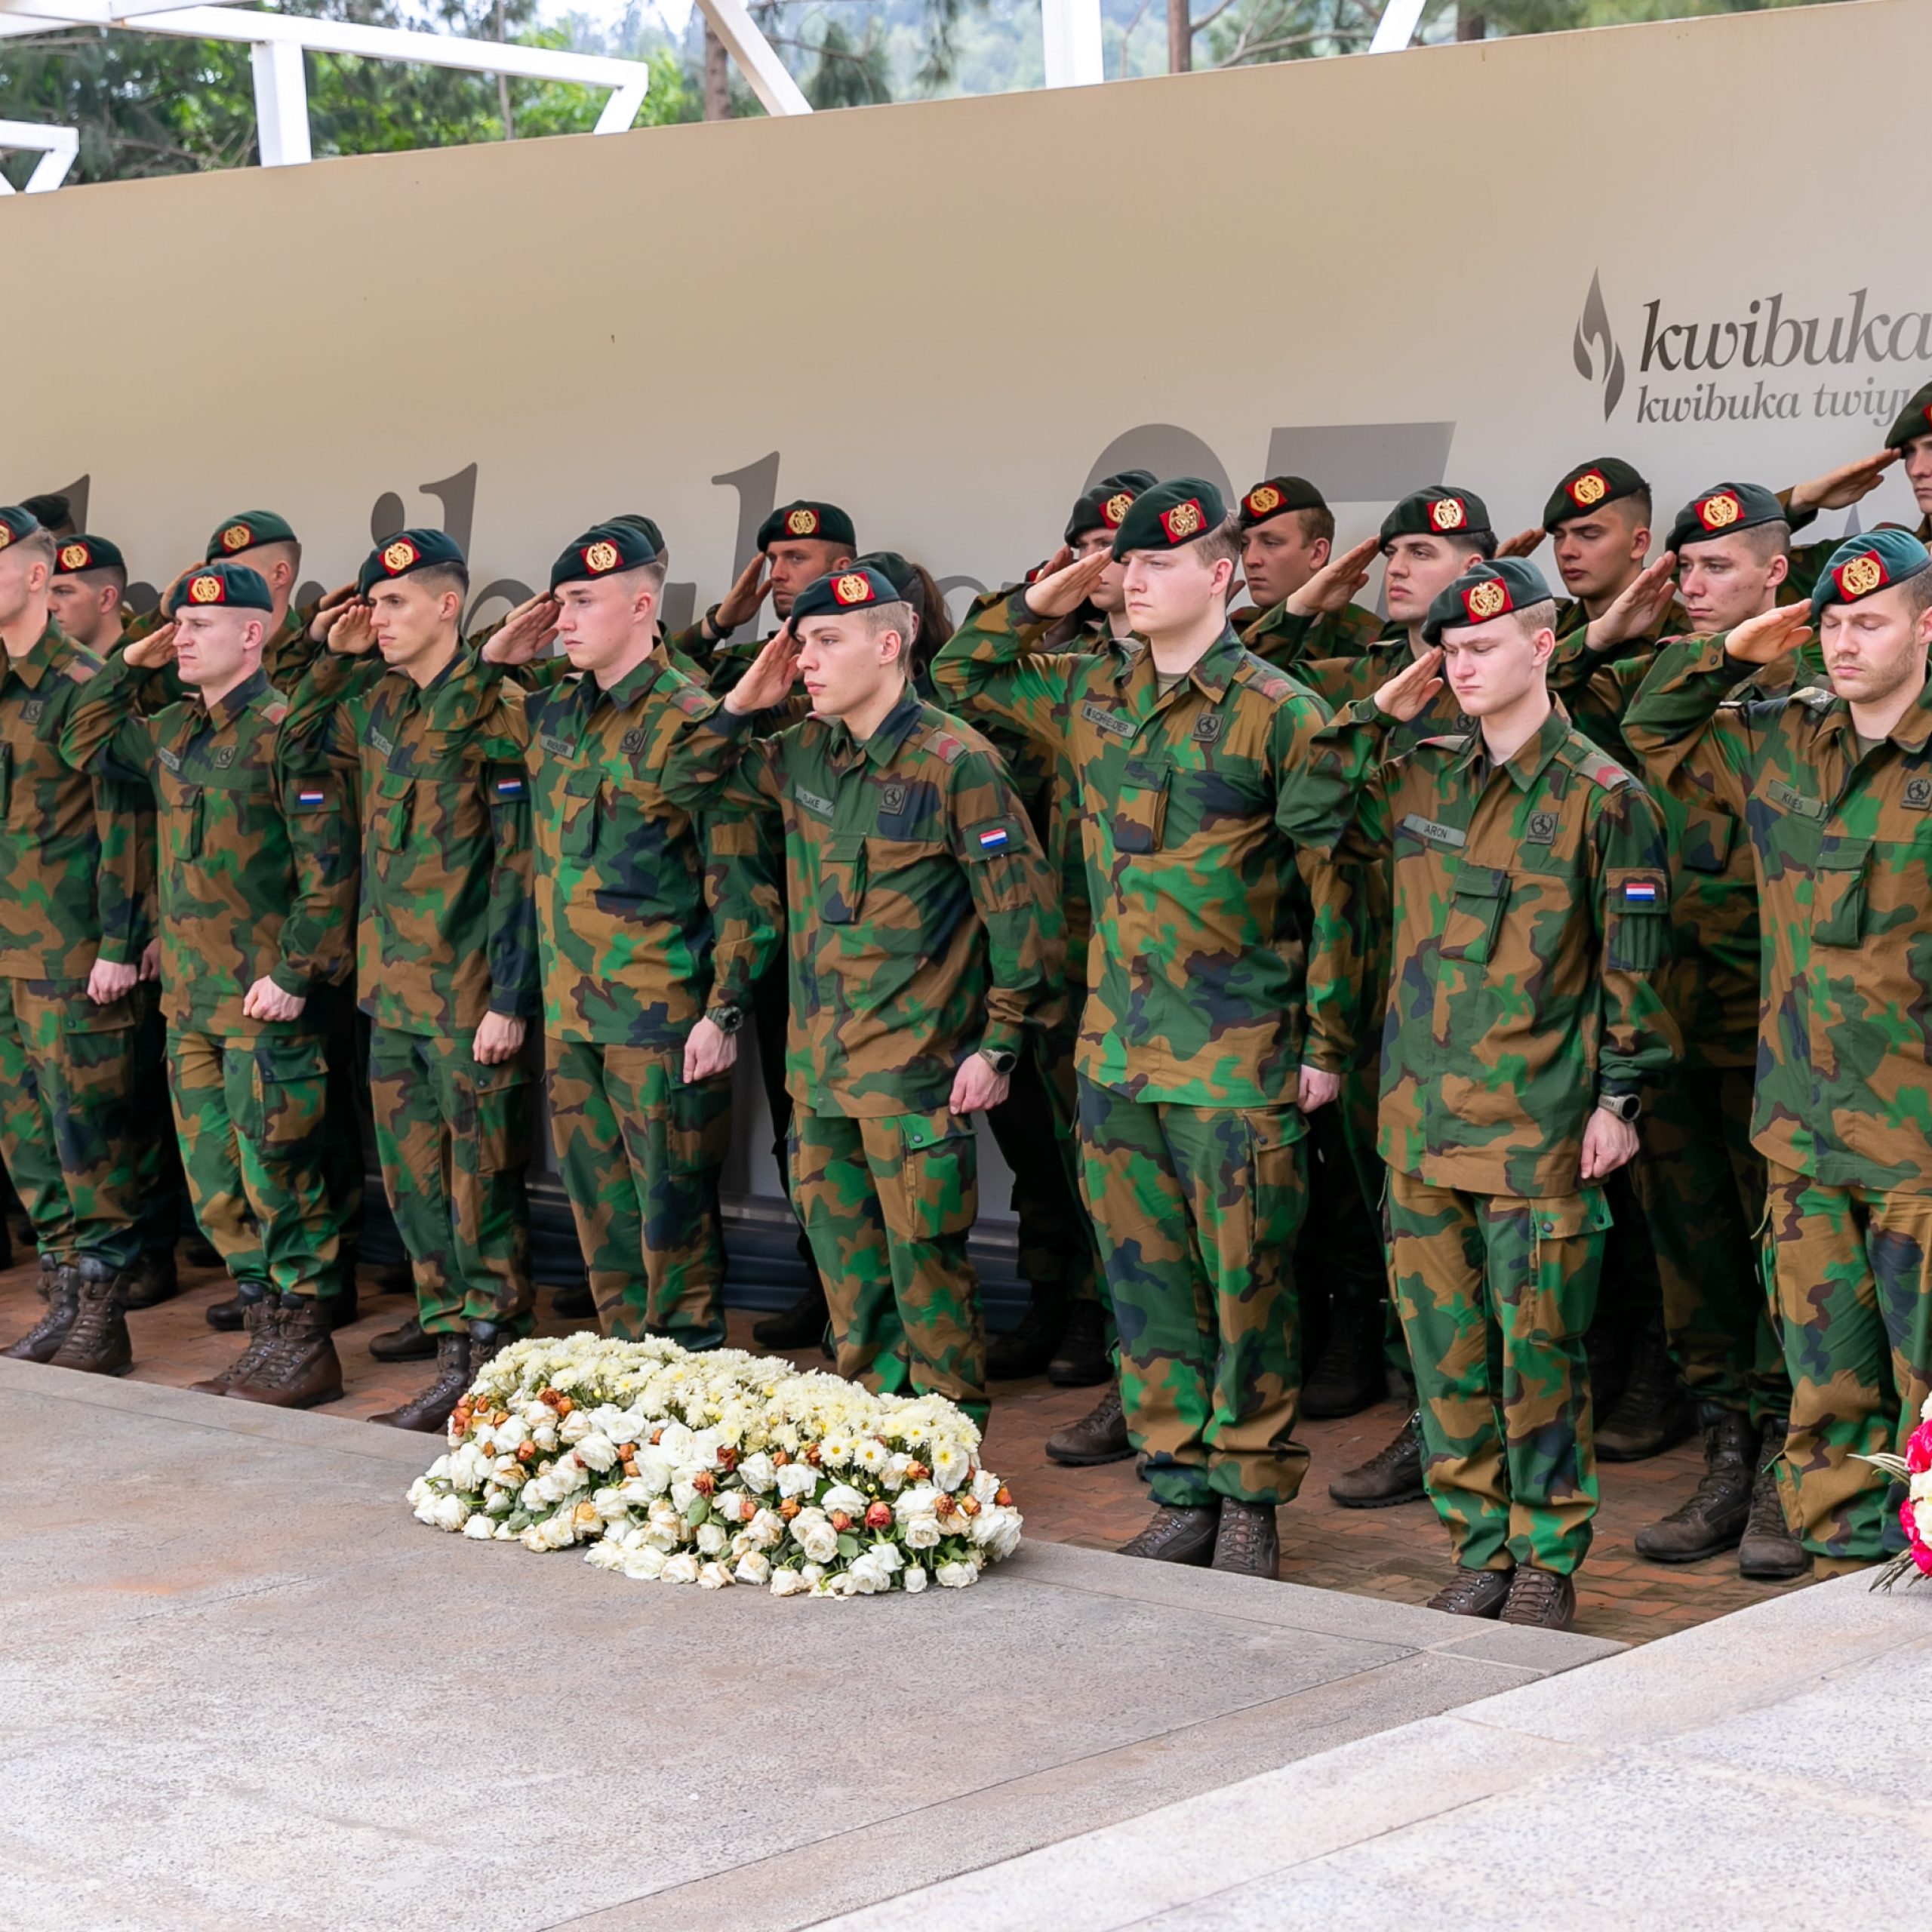 A Contingent from Royal Netherlands Army Start Training In Rwanda 